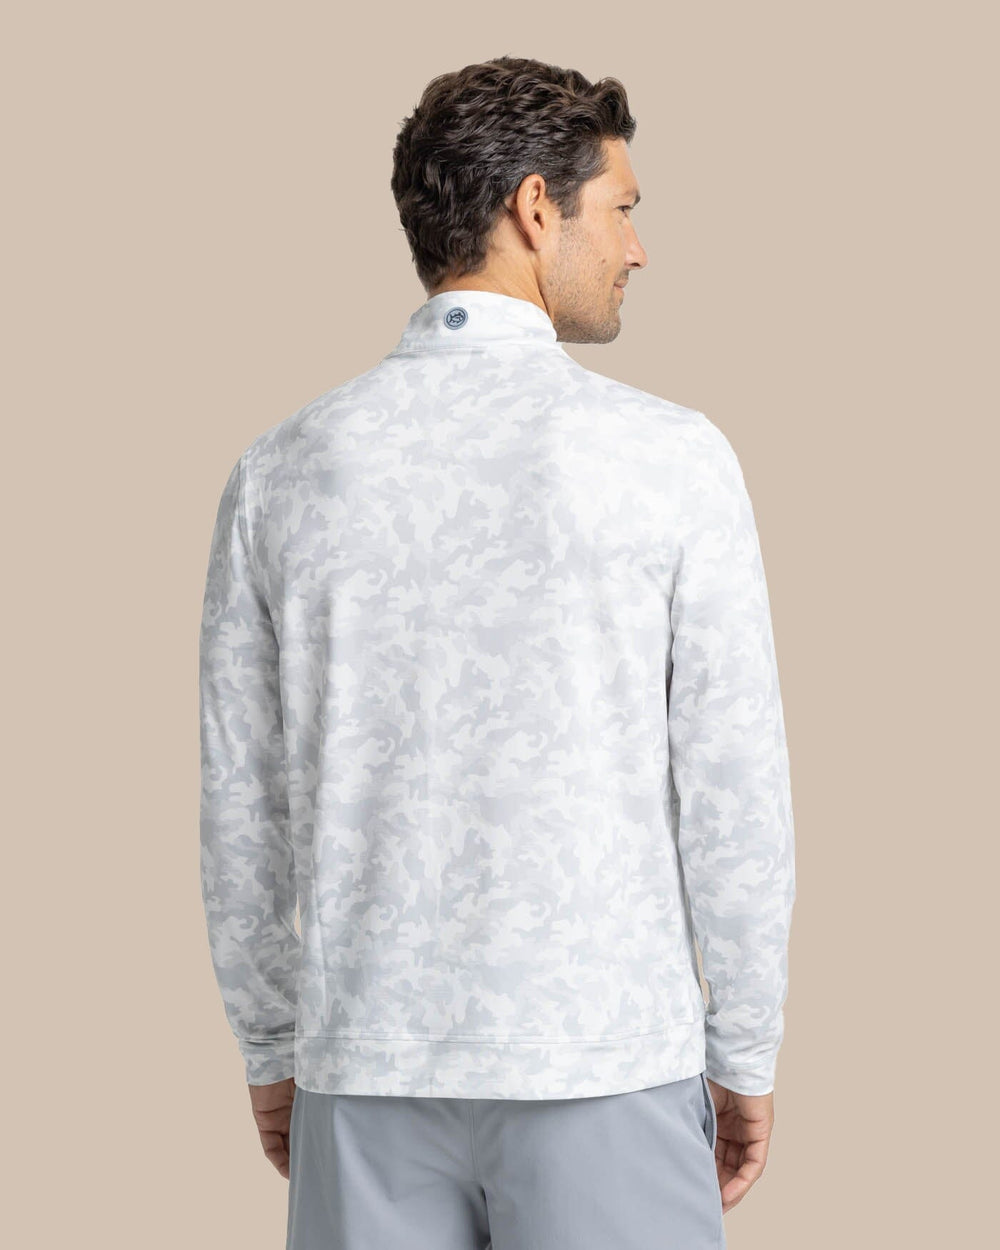 The back view of the Southern Tide Island Camo Print Cruiser Quarter Zip by Southern Tide - Classic White